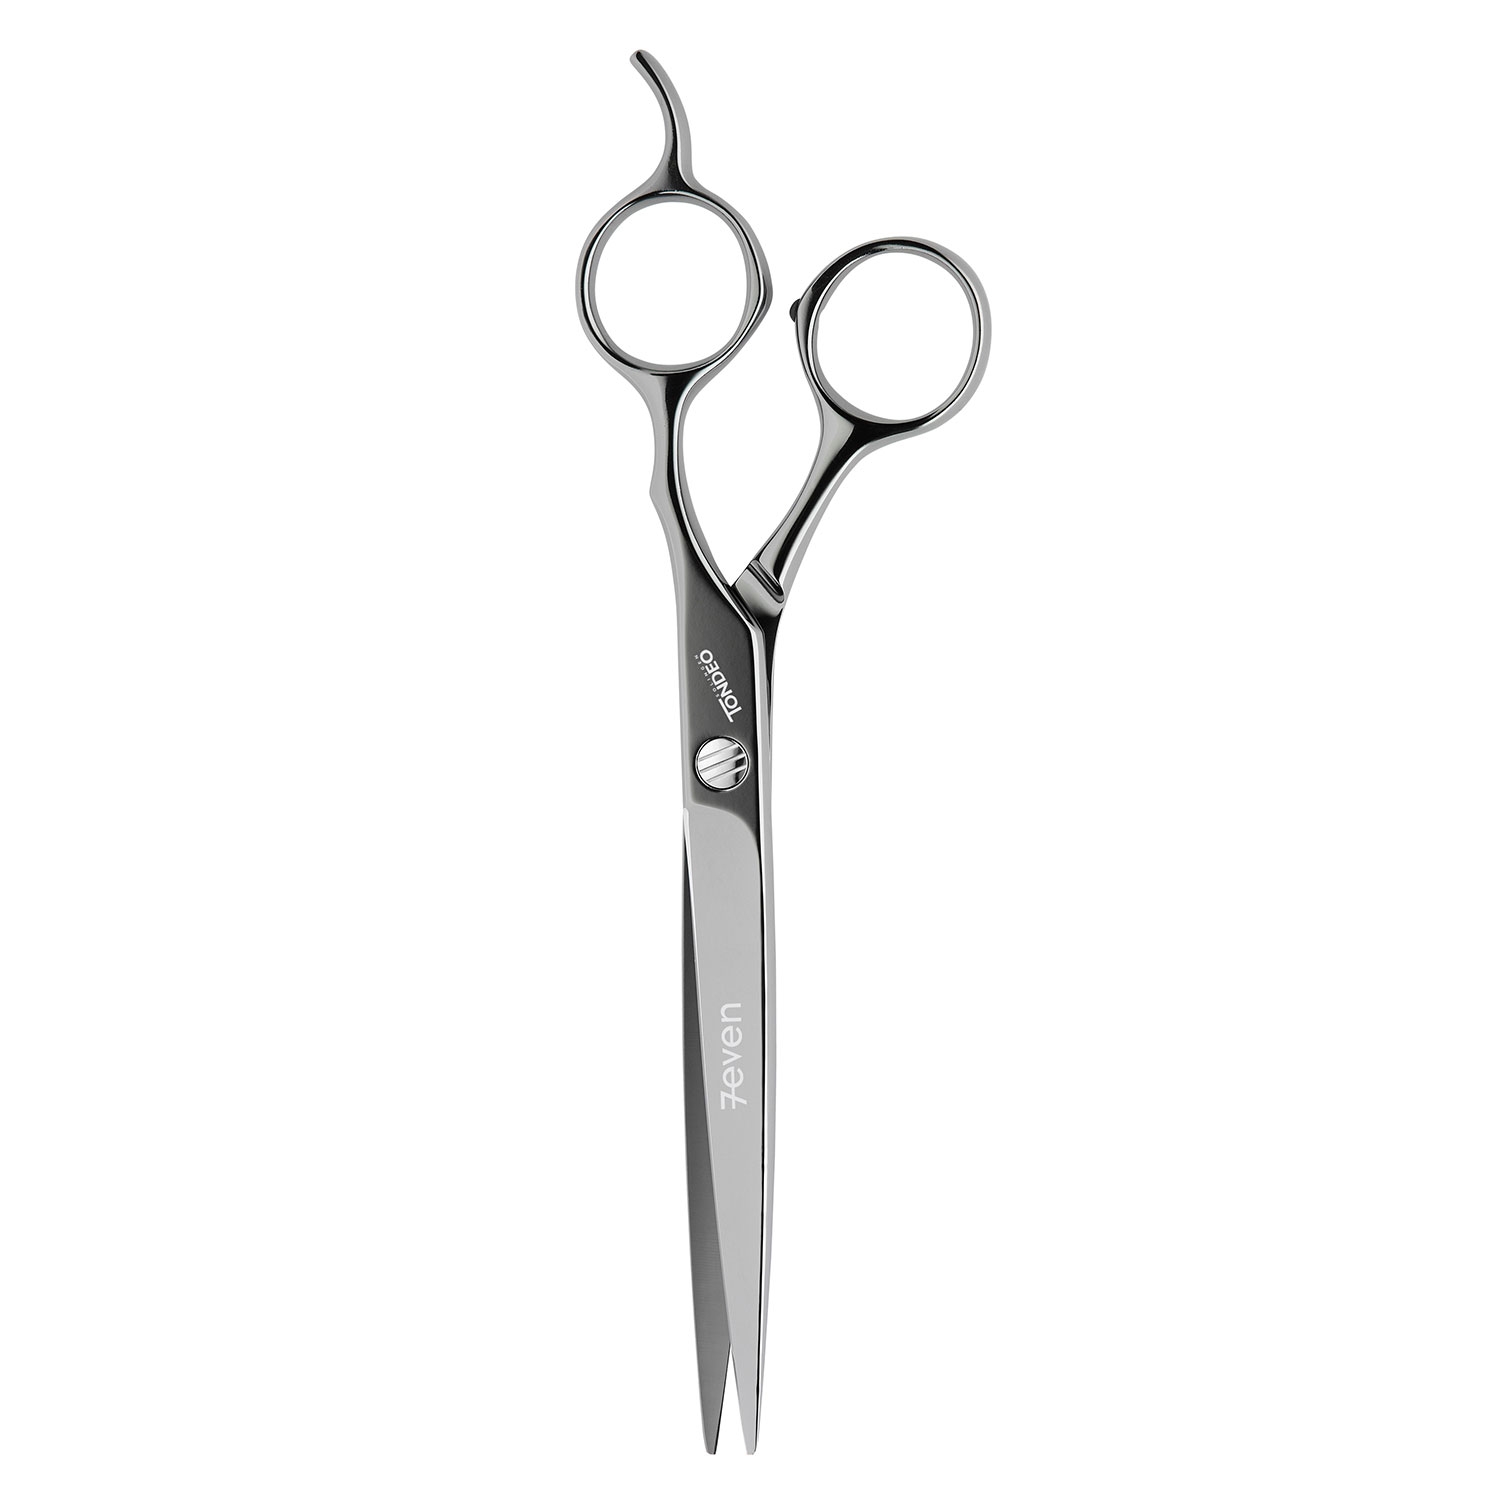 Product image from Tondeo Scissors - Seven Black Offset Scissors 7.0"